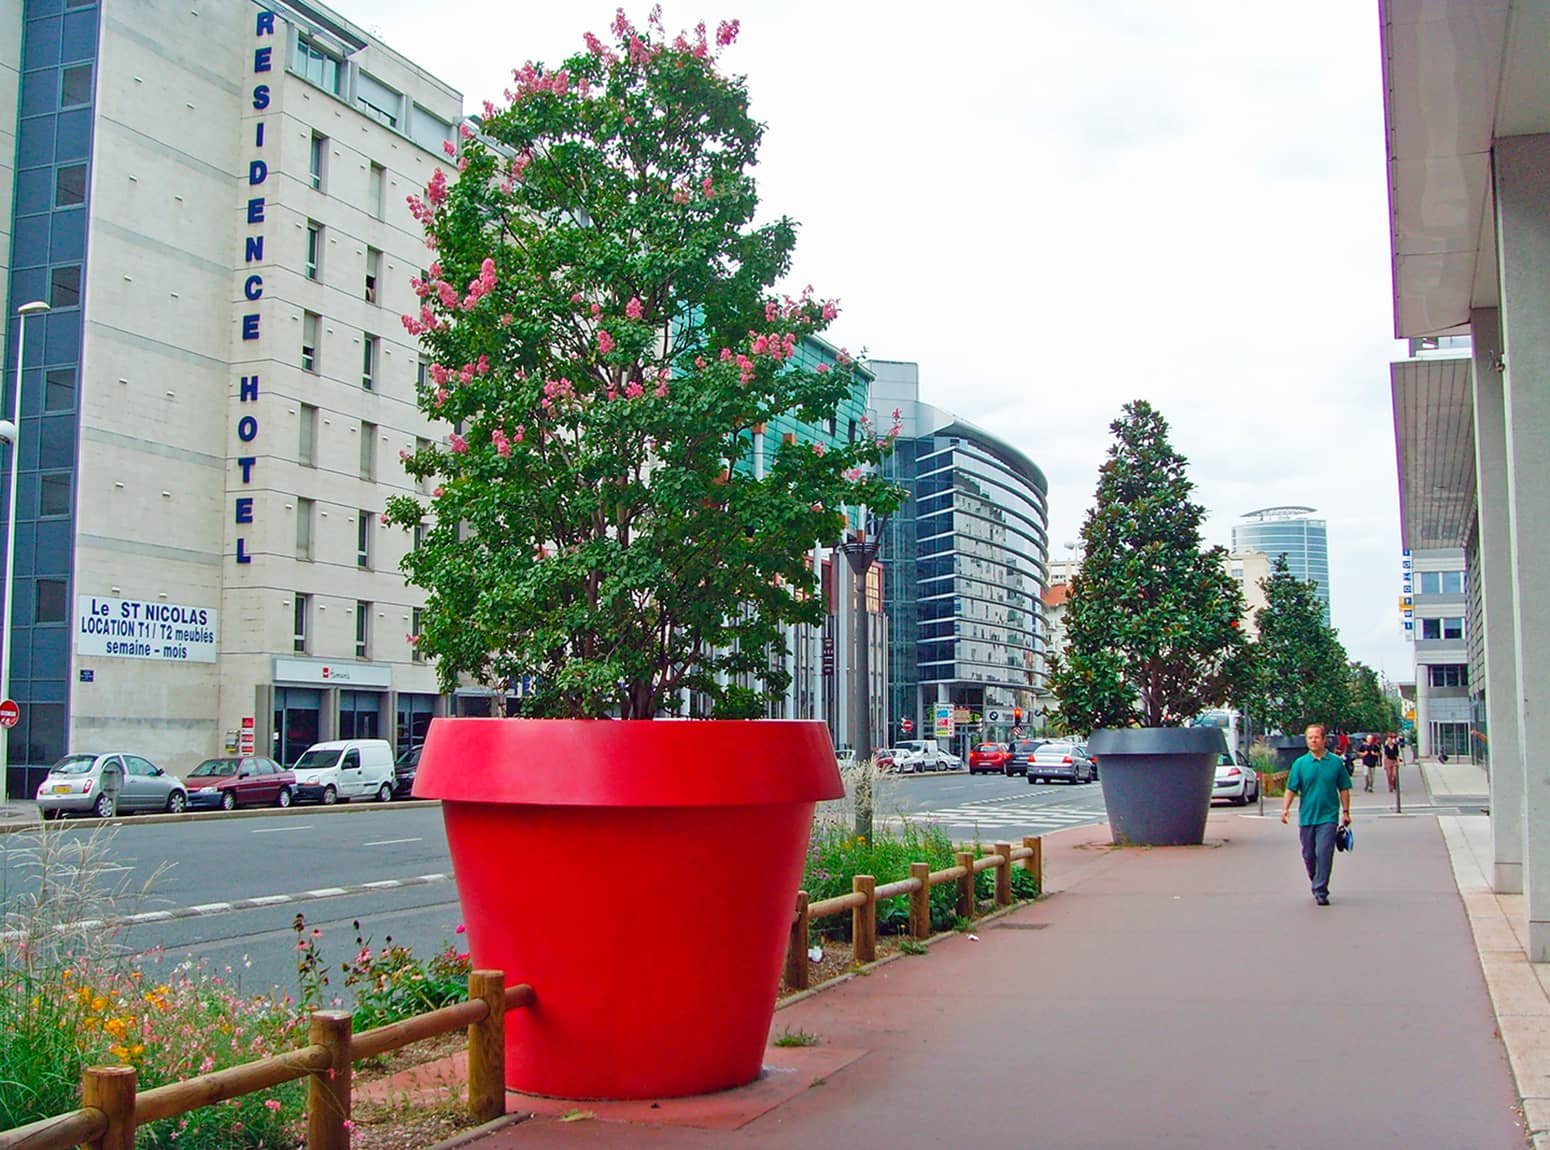 GIO MONSTER - This Gigantic Flower Pot Stands Over 6 Feet Tall!